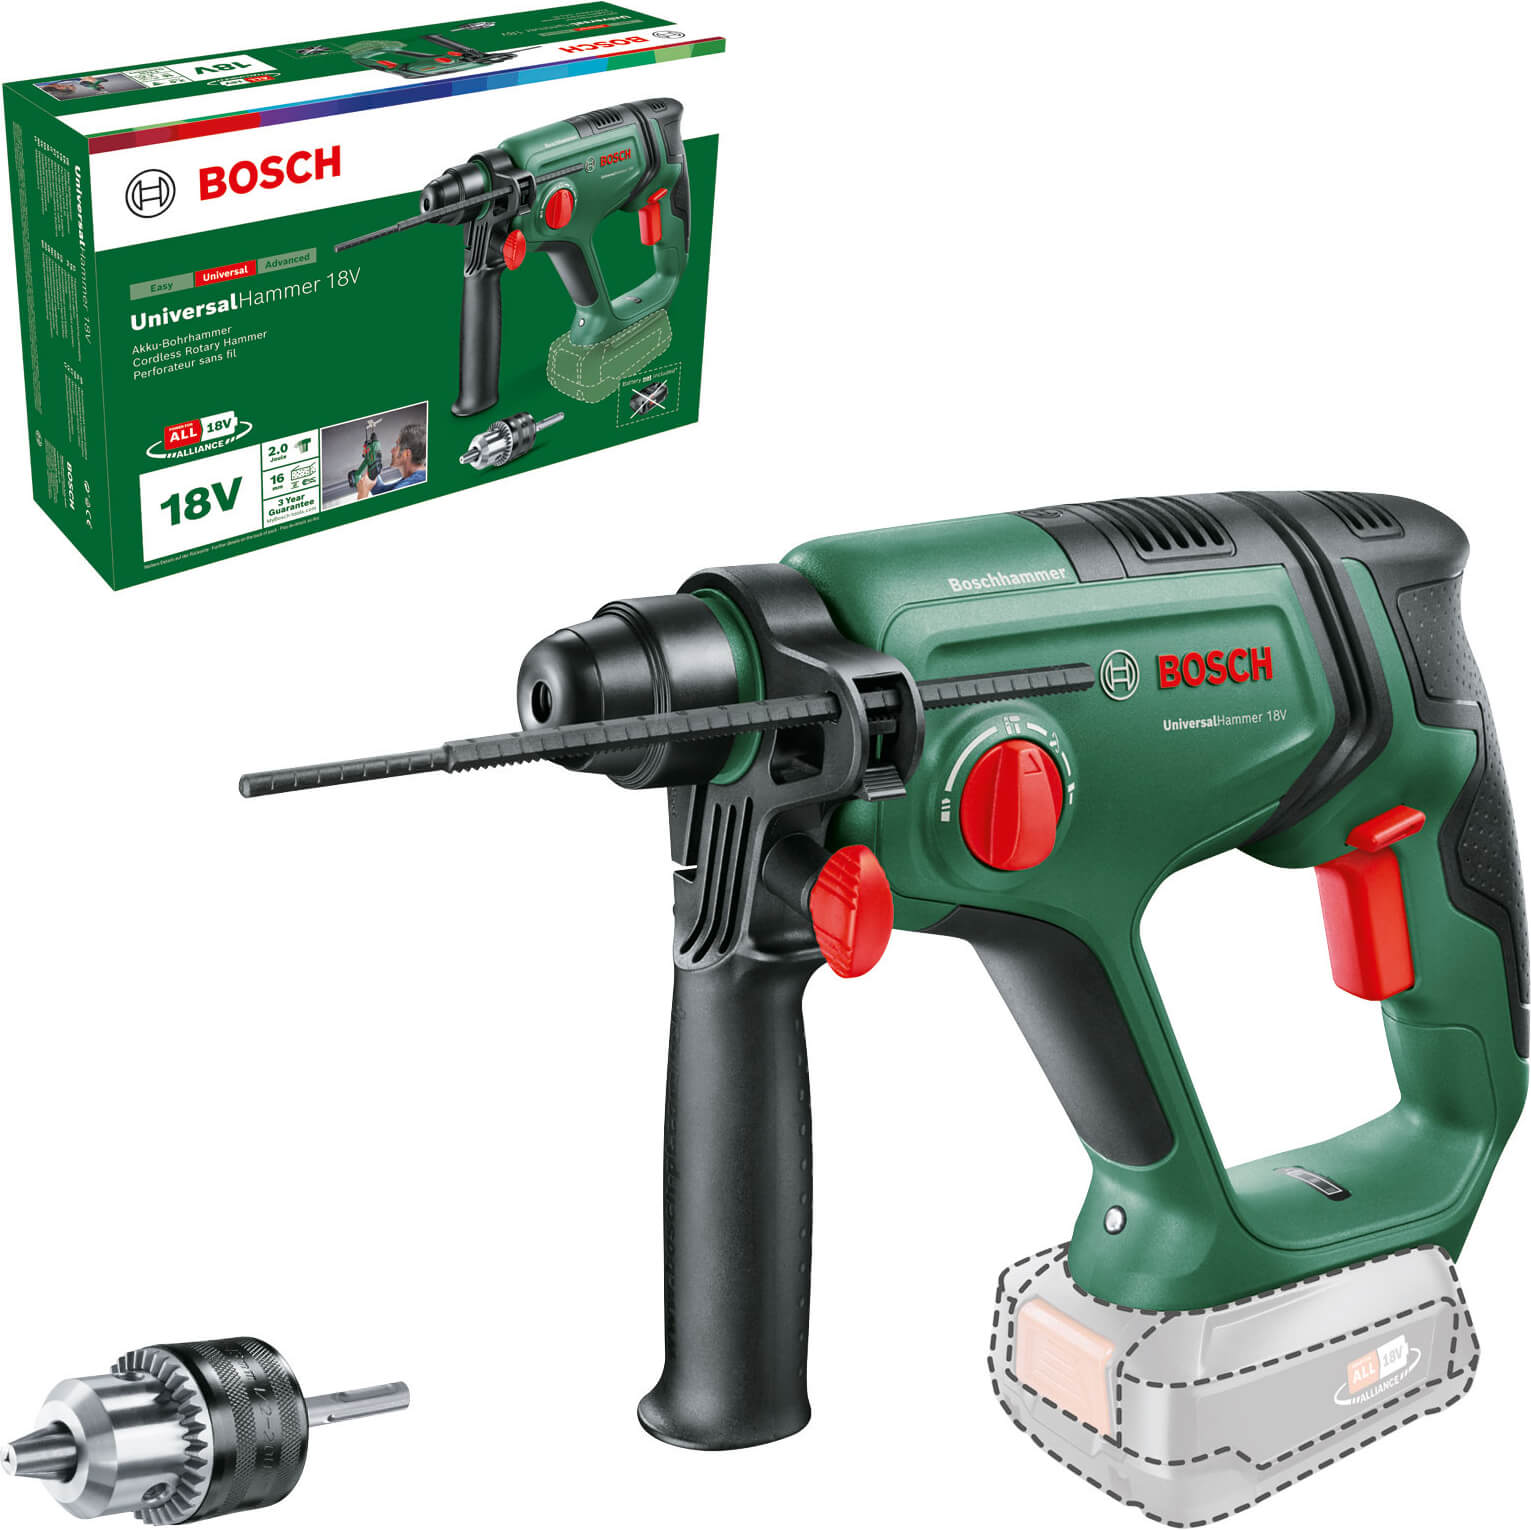 Image of Bosch UNIVERSALHAMMER 18v Cordless SDS Drill No Batteries No Charger Chuck Adaptor